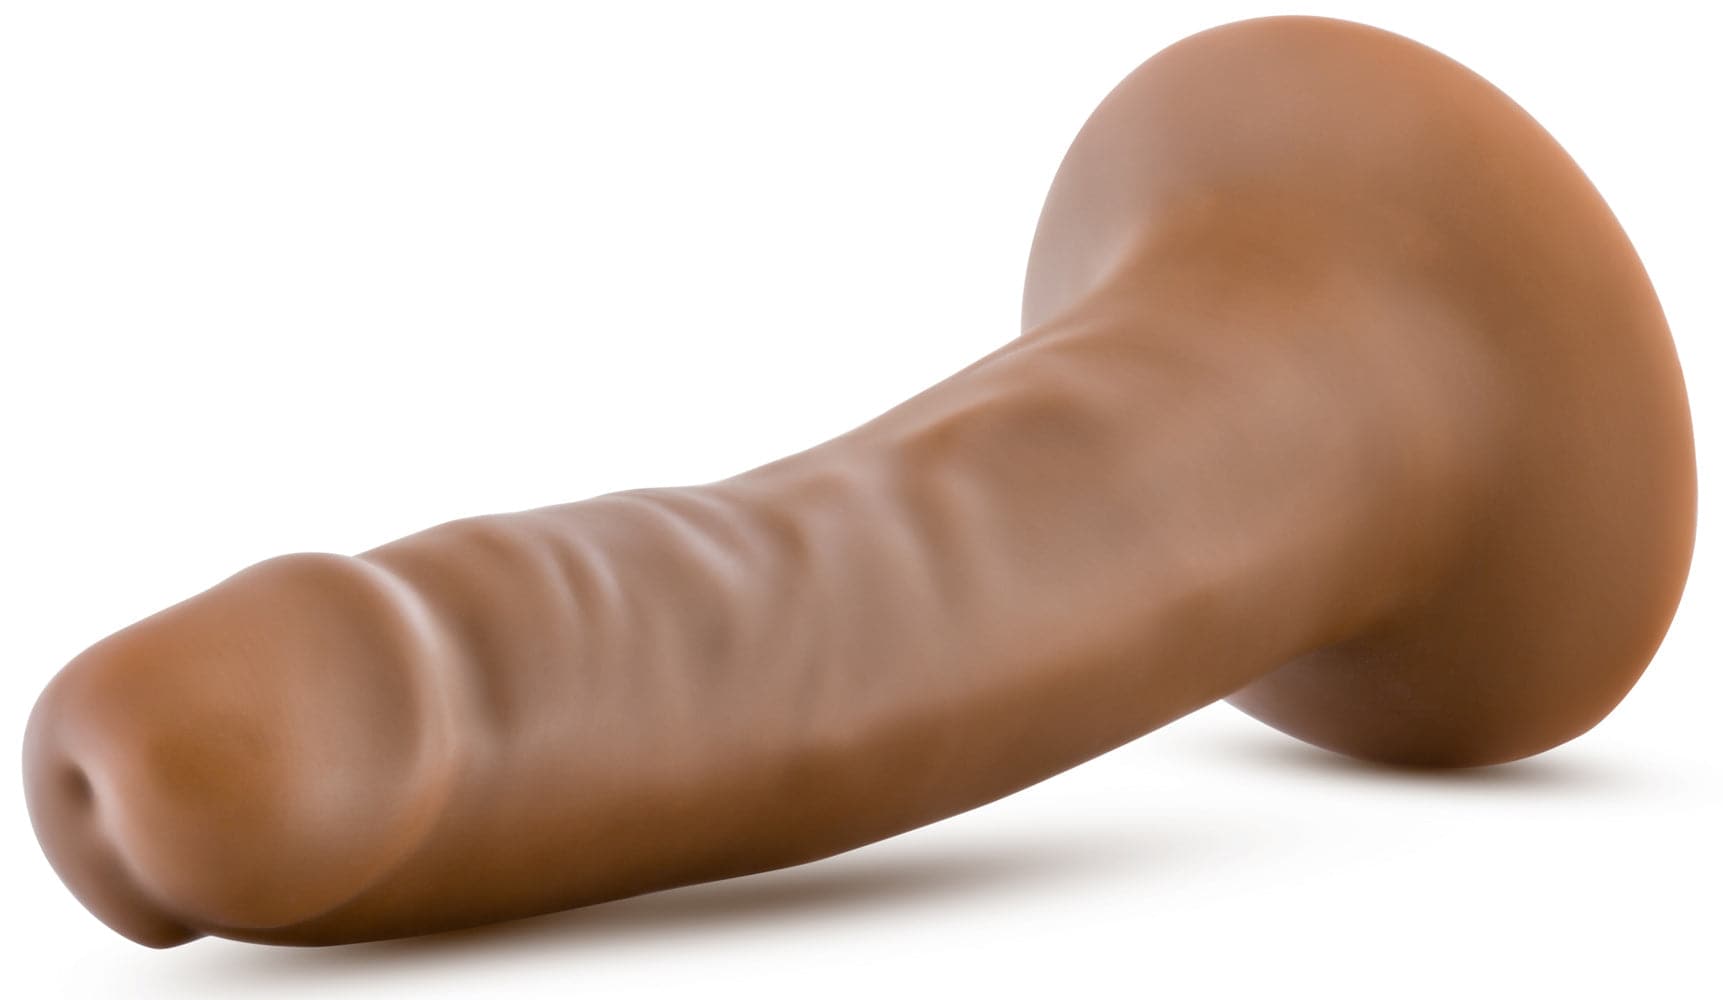 dr skin silicone dr lucas 5 inch dong with suction cup mocha